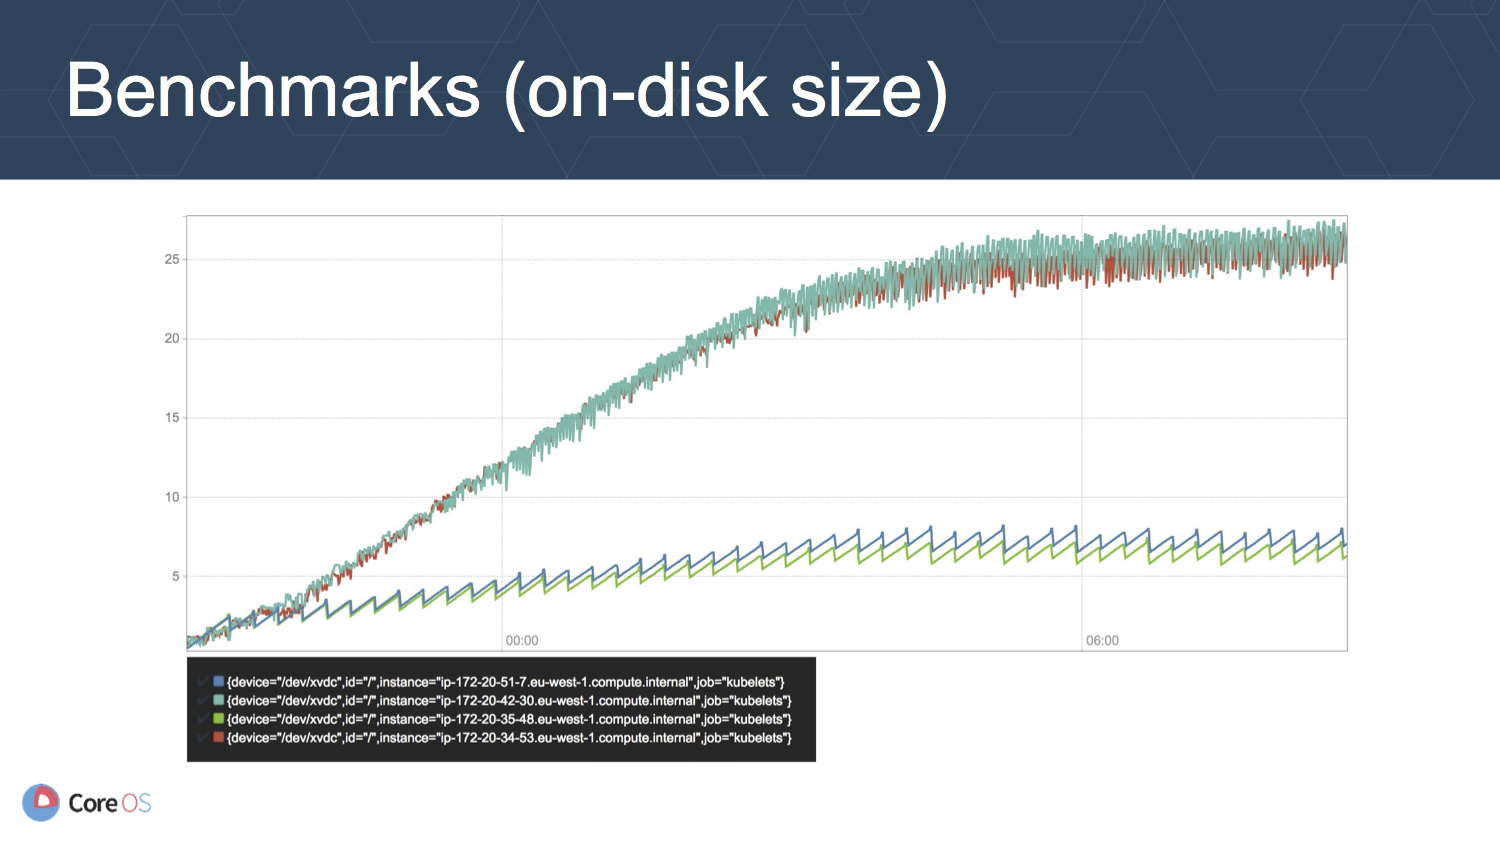 1.12.benchmarks_disk_size.png